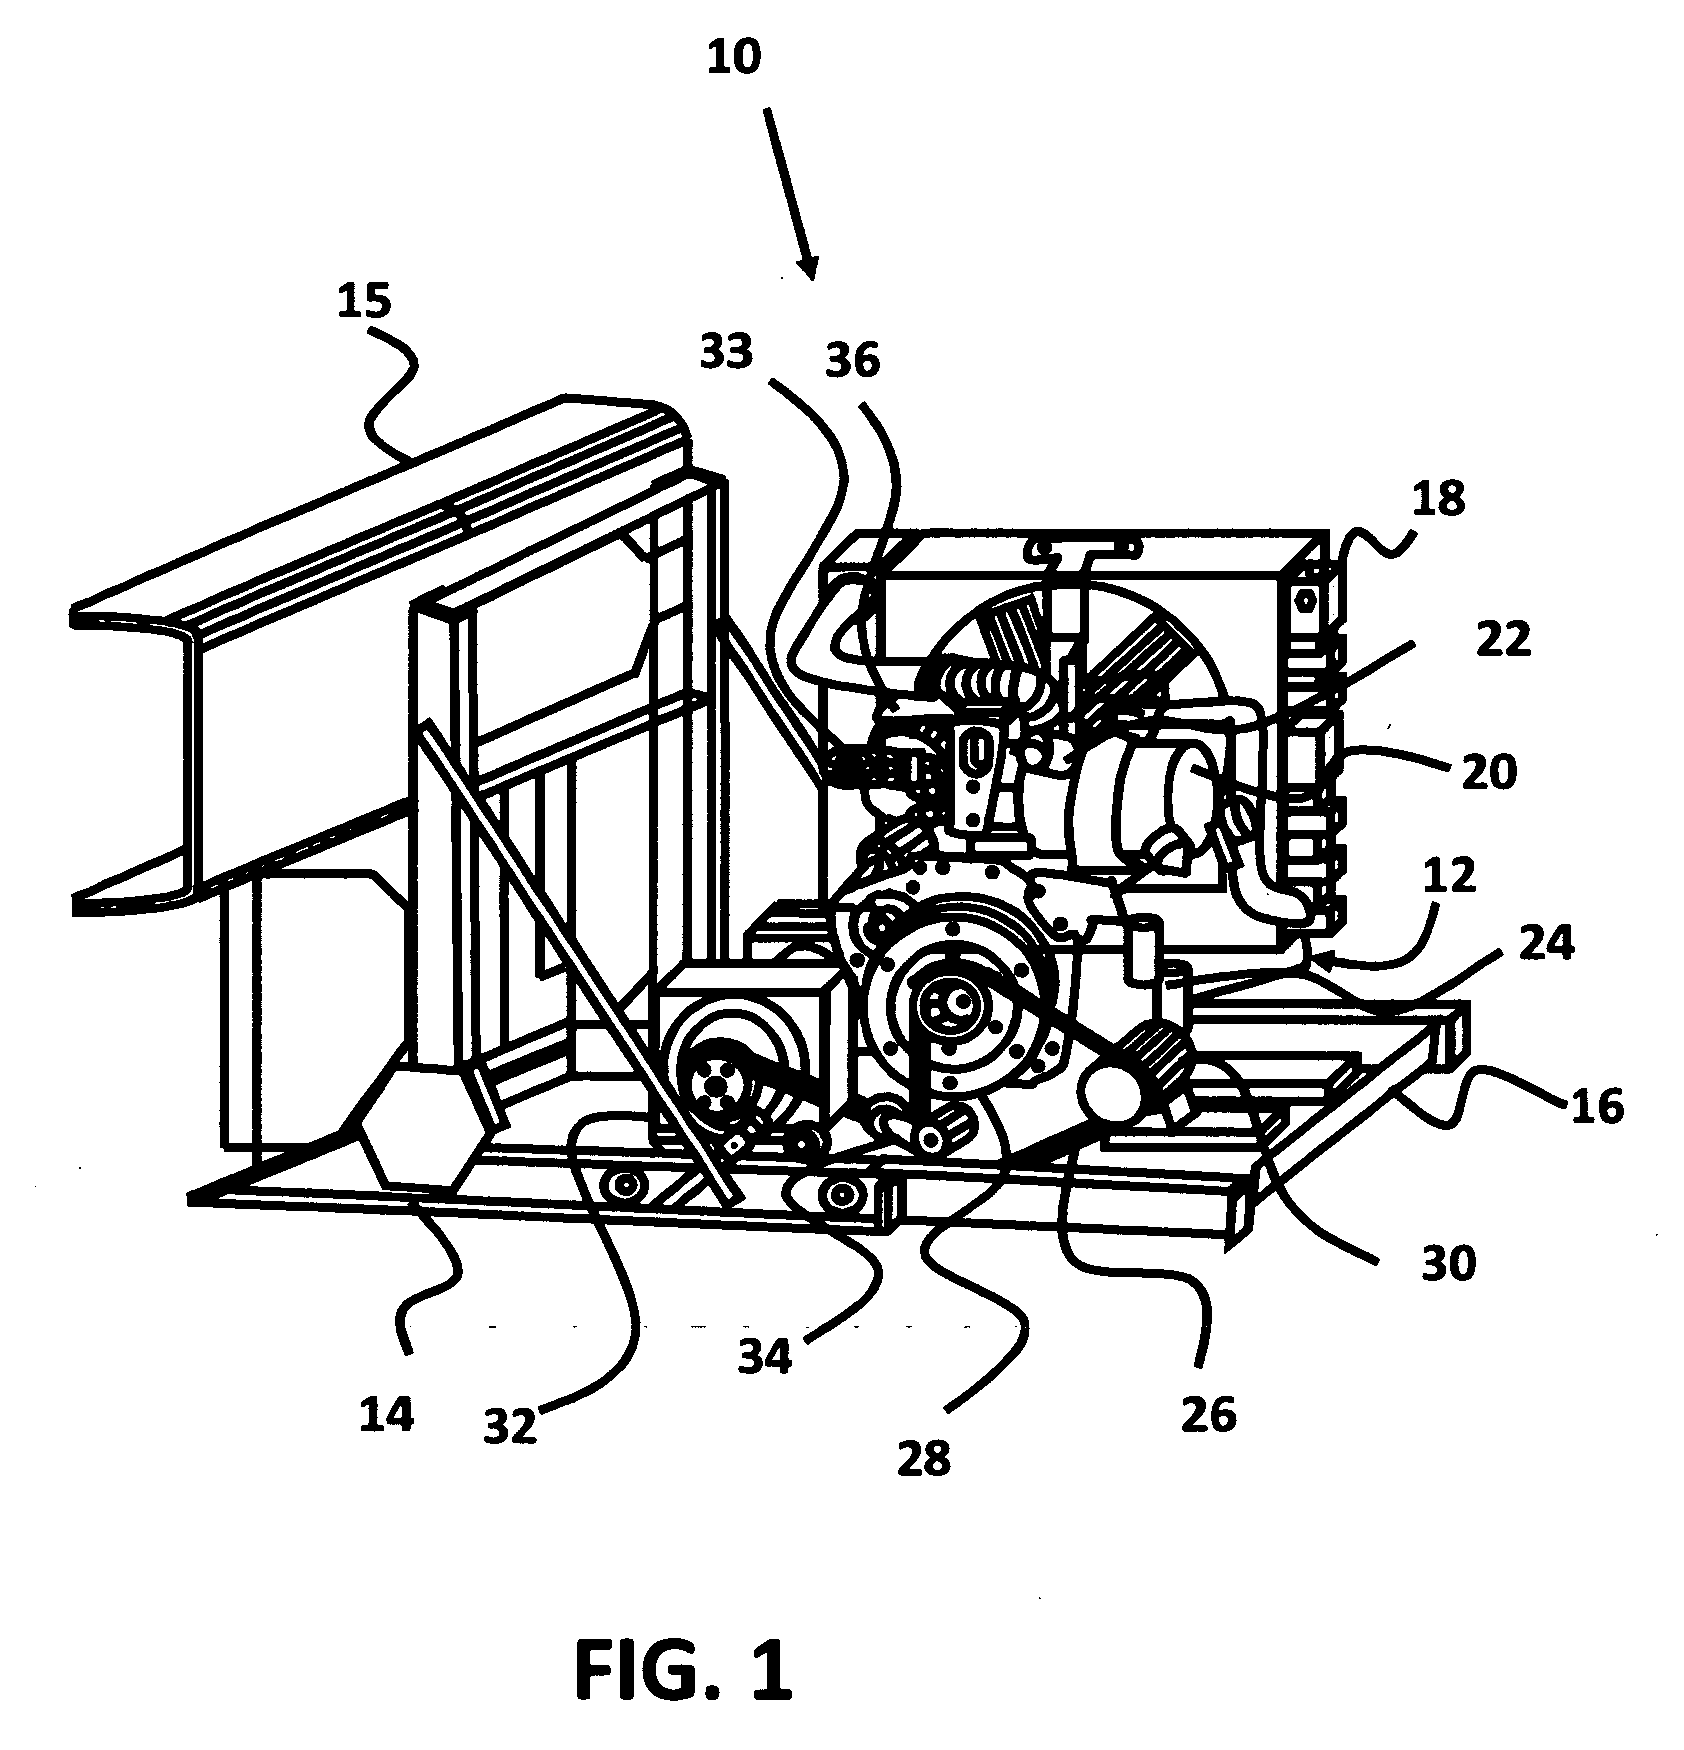 Diesel particulate filter system for auxiliary power units